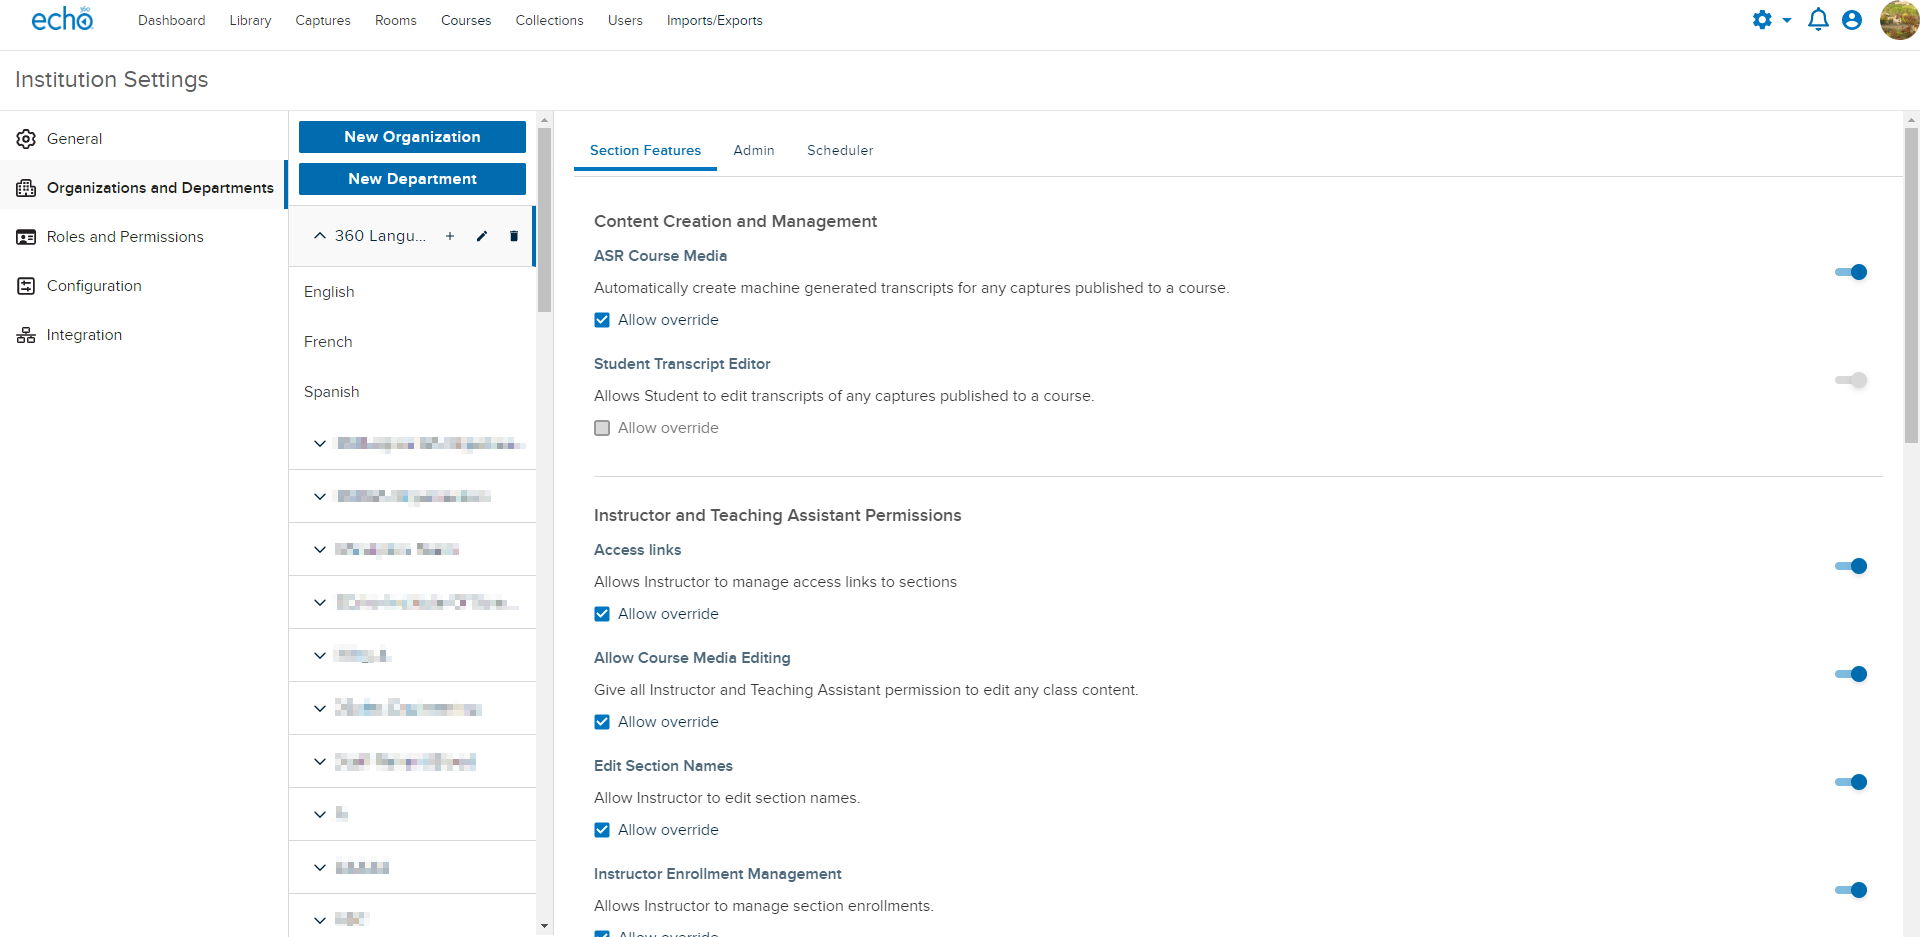 Organization expanded to see the Departments within it and action items displayed as described